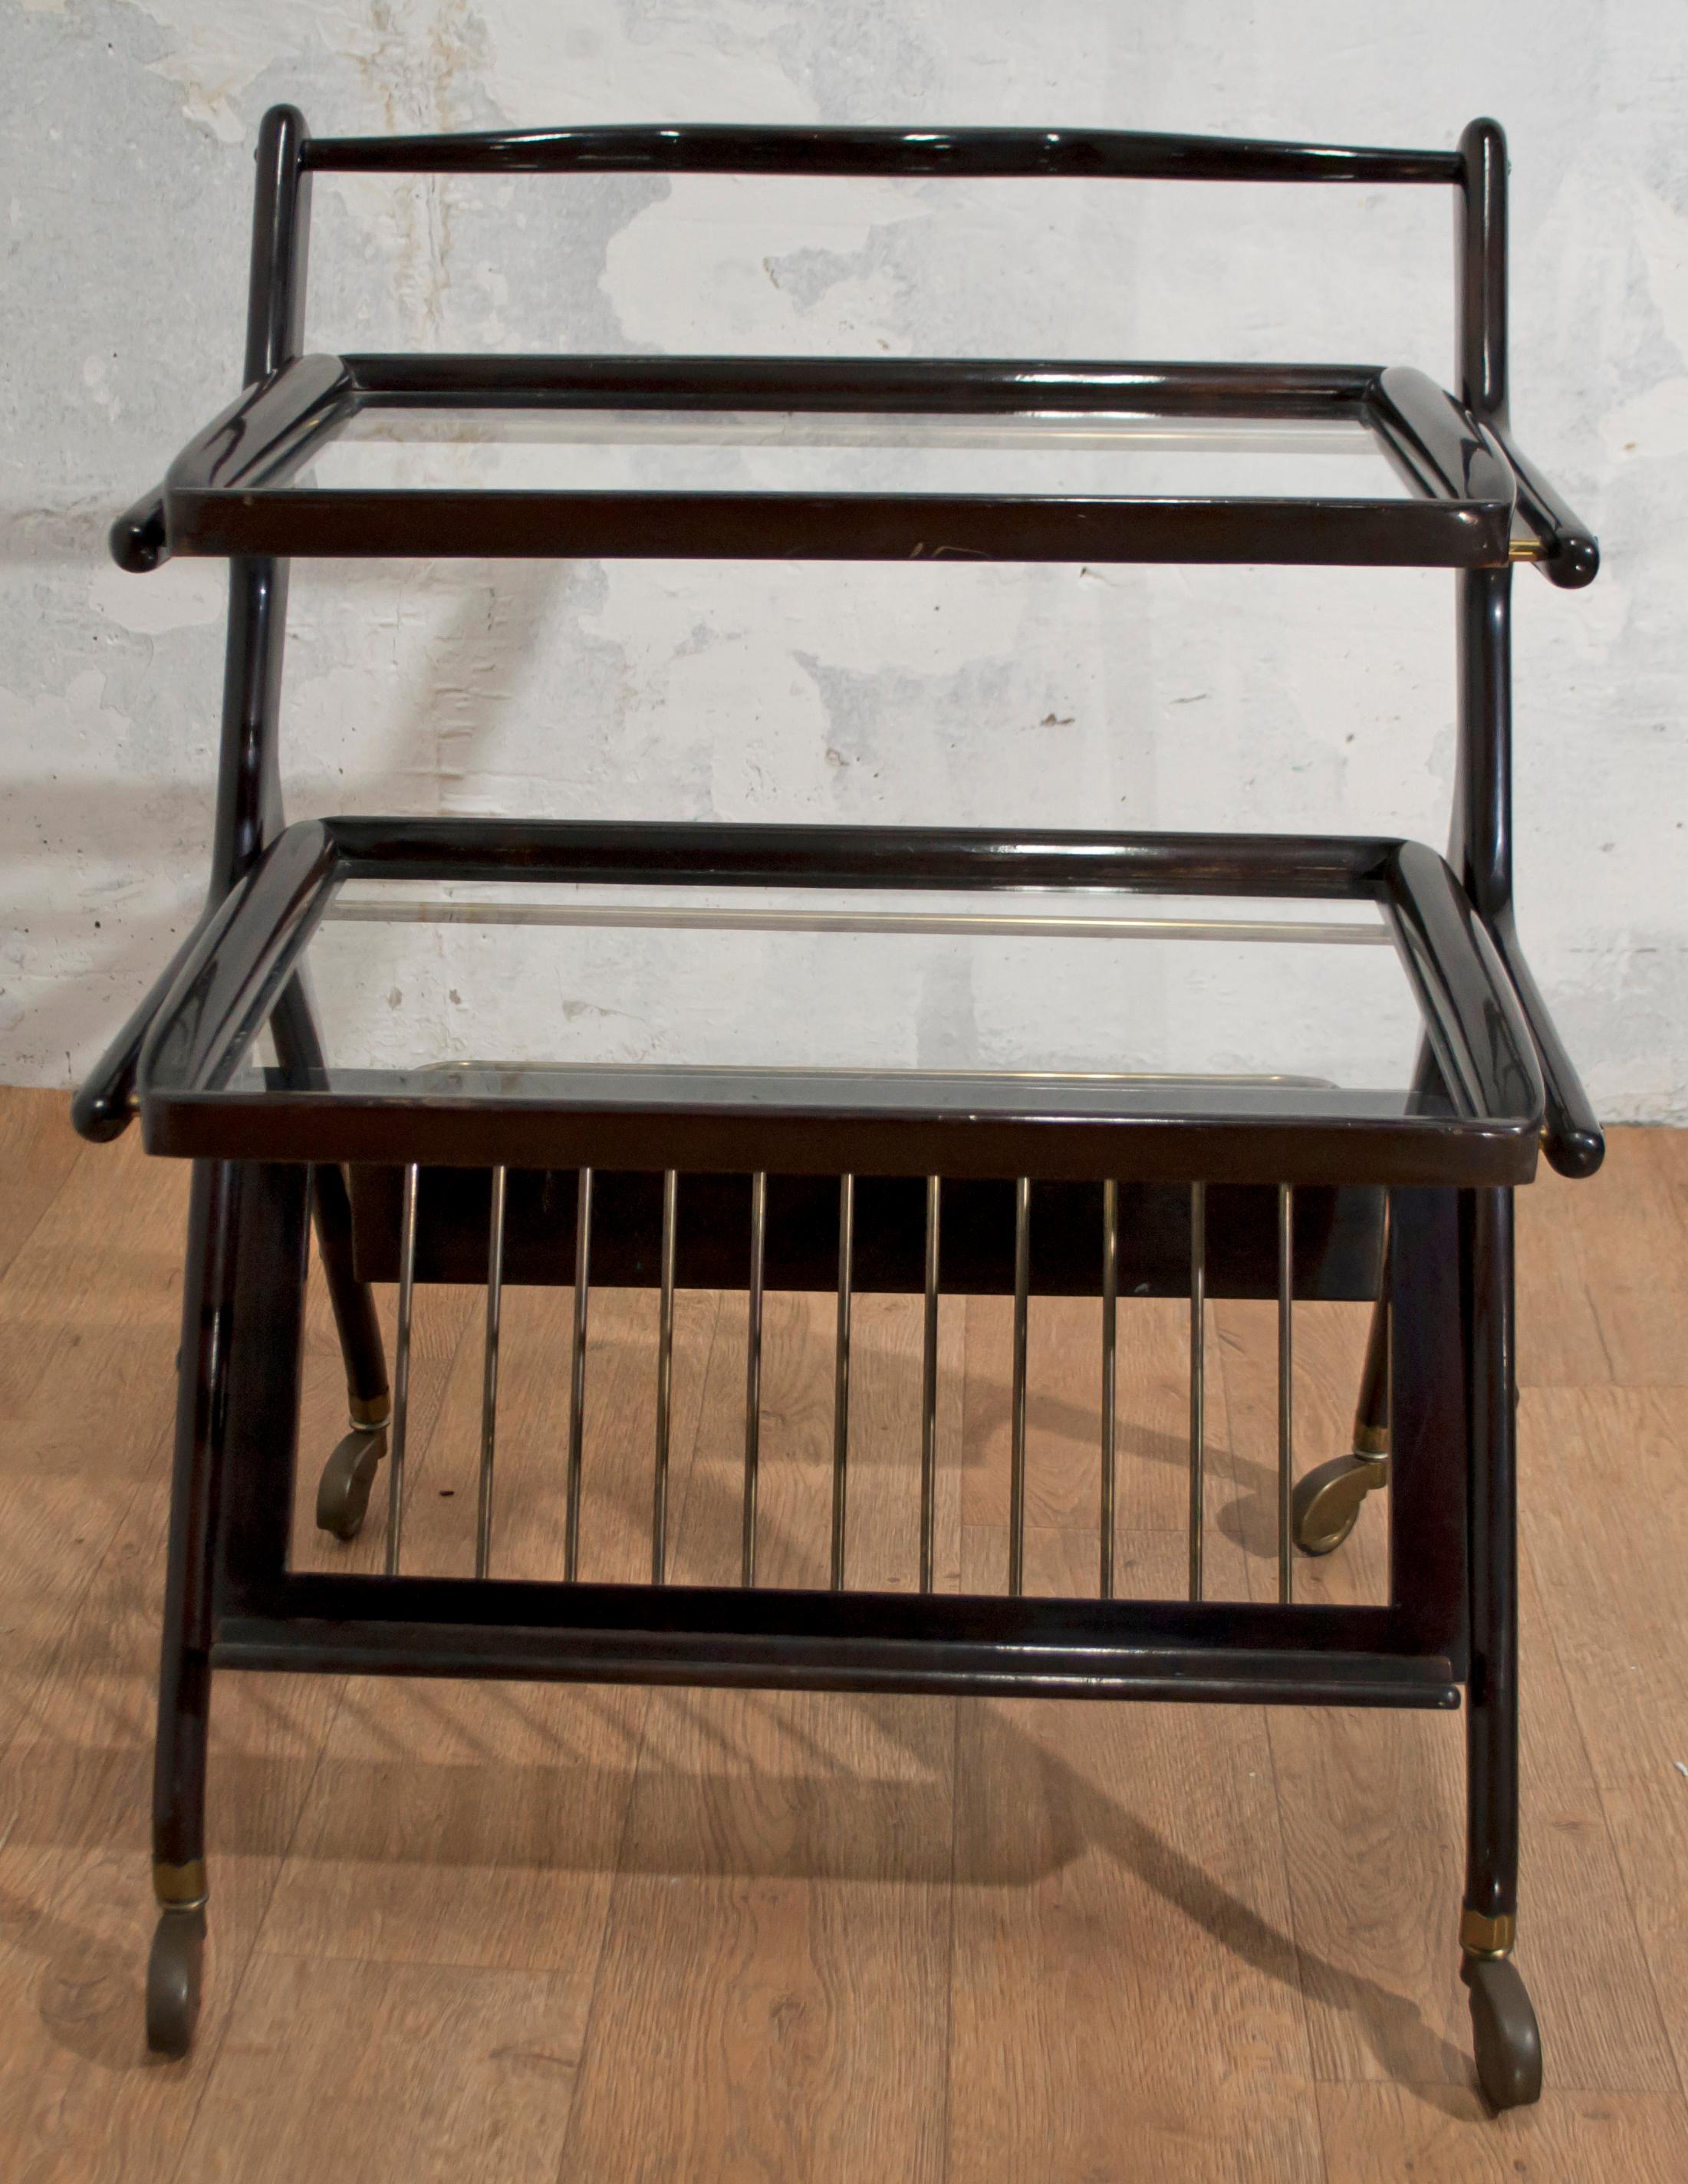 This bar trolley in mahogany and brass was designed by Cesare Lacca, has both removable trays, and a lower front level for magazines, rear for bottles.

